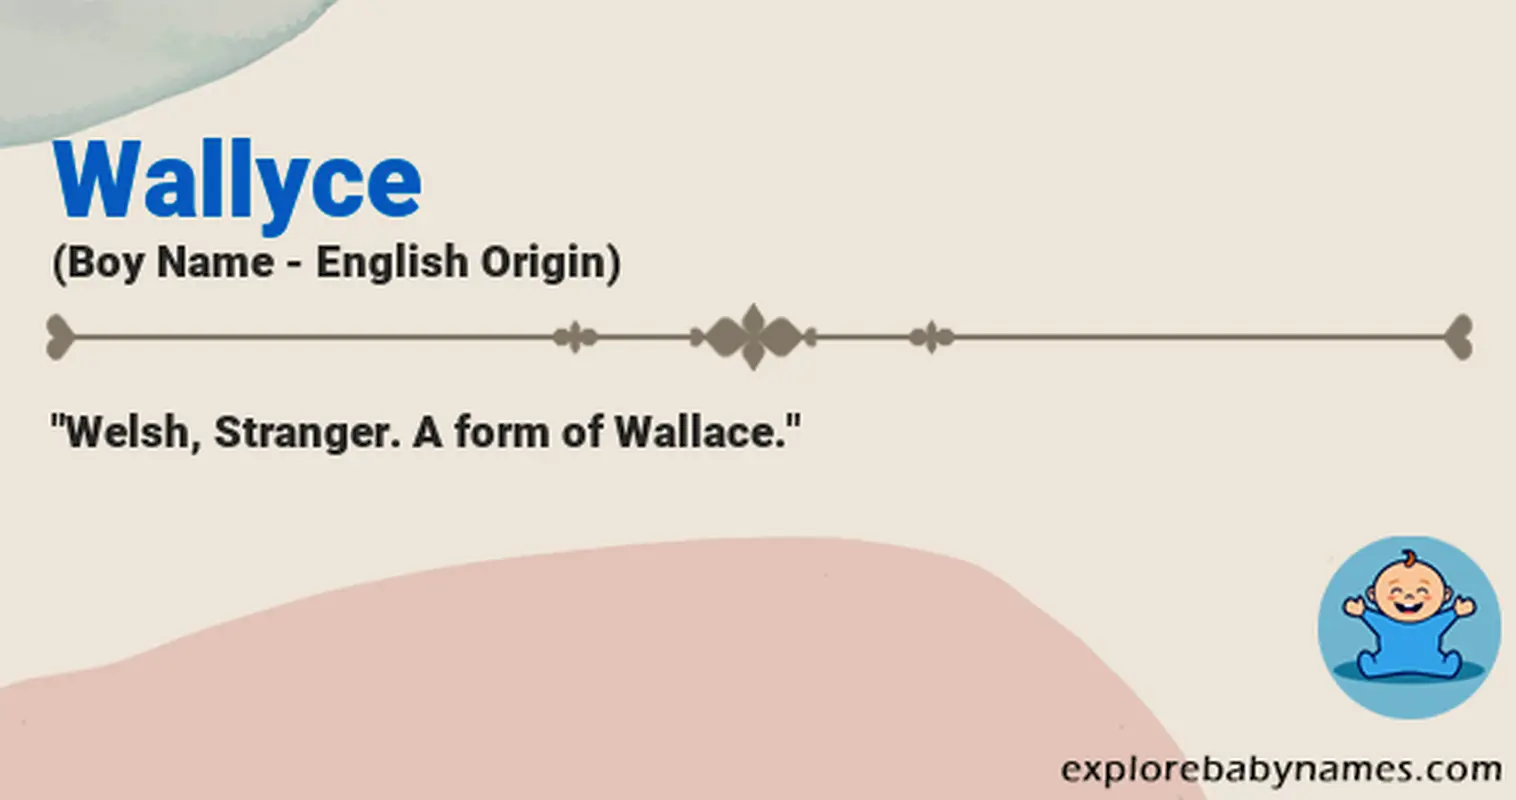 Meaning of Wallyce